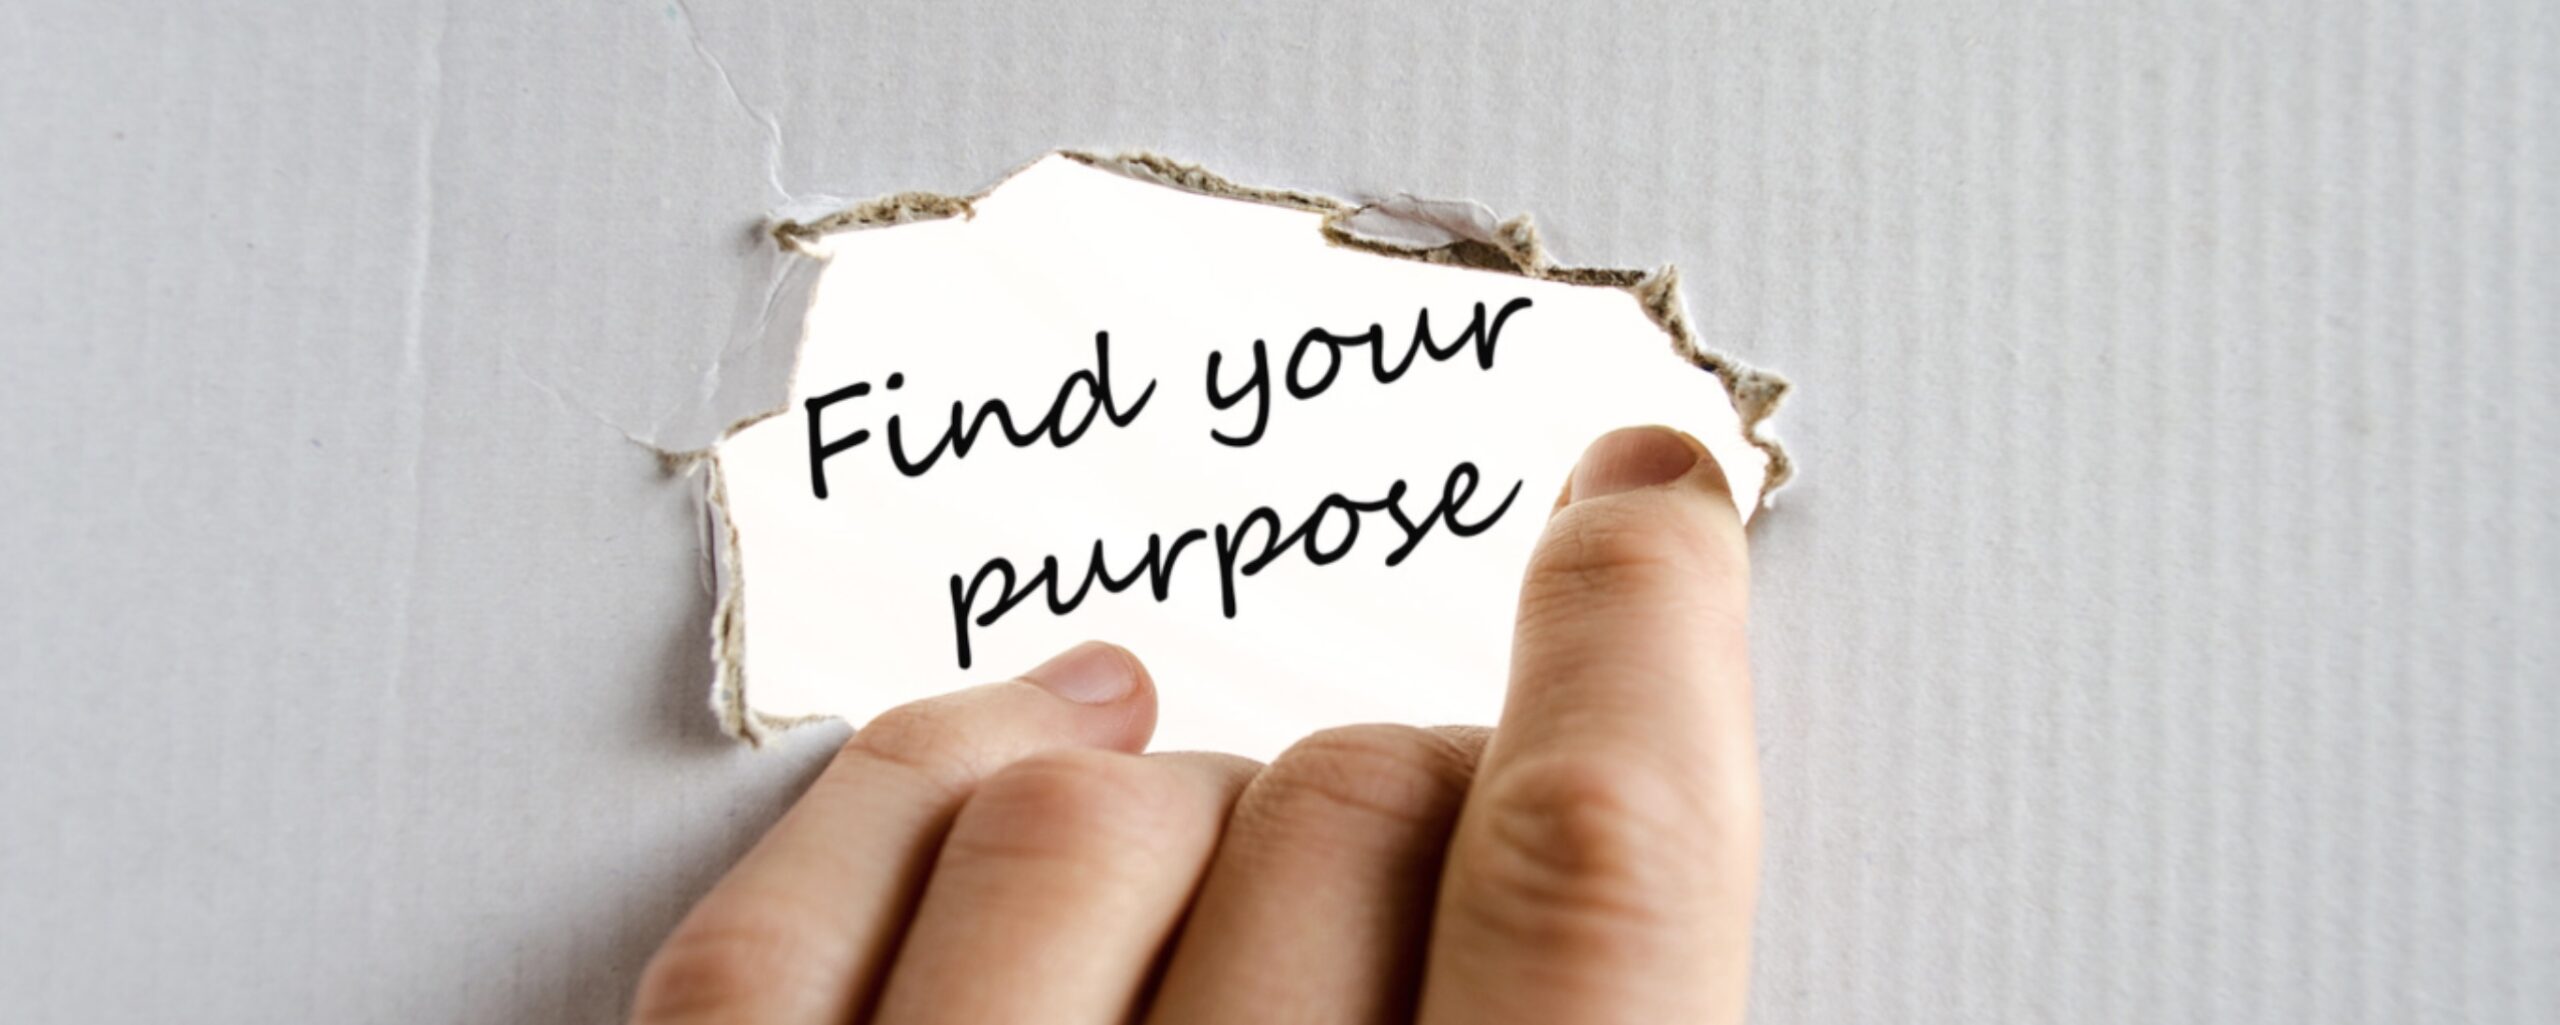 HAVING BETTER BUSINESS SKILLS WILL HELP YOU STAY IN TOUCH WITH YOUR PURPOSE